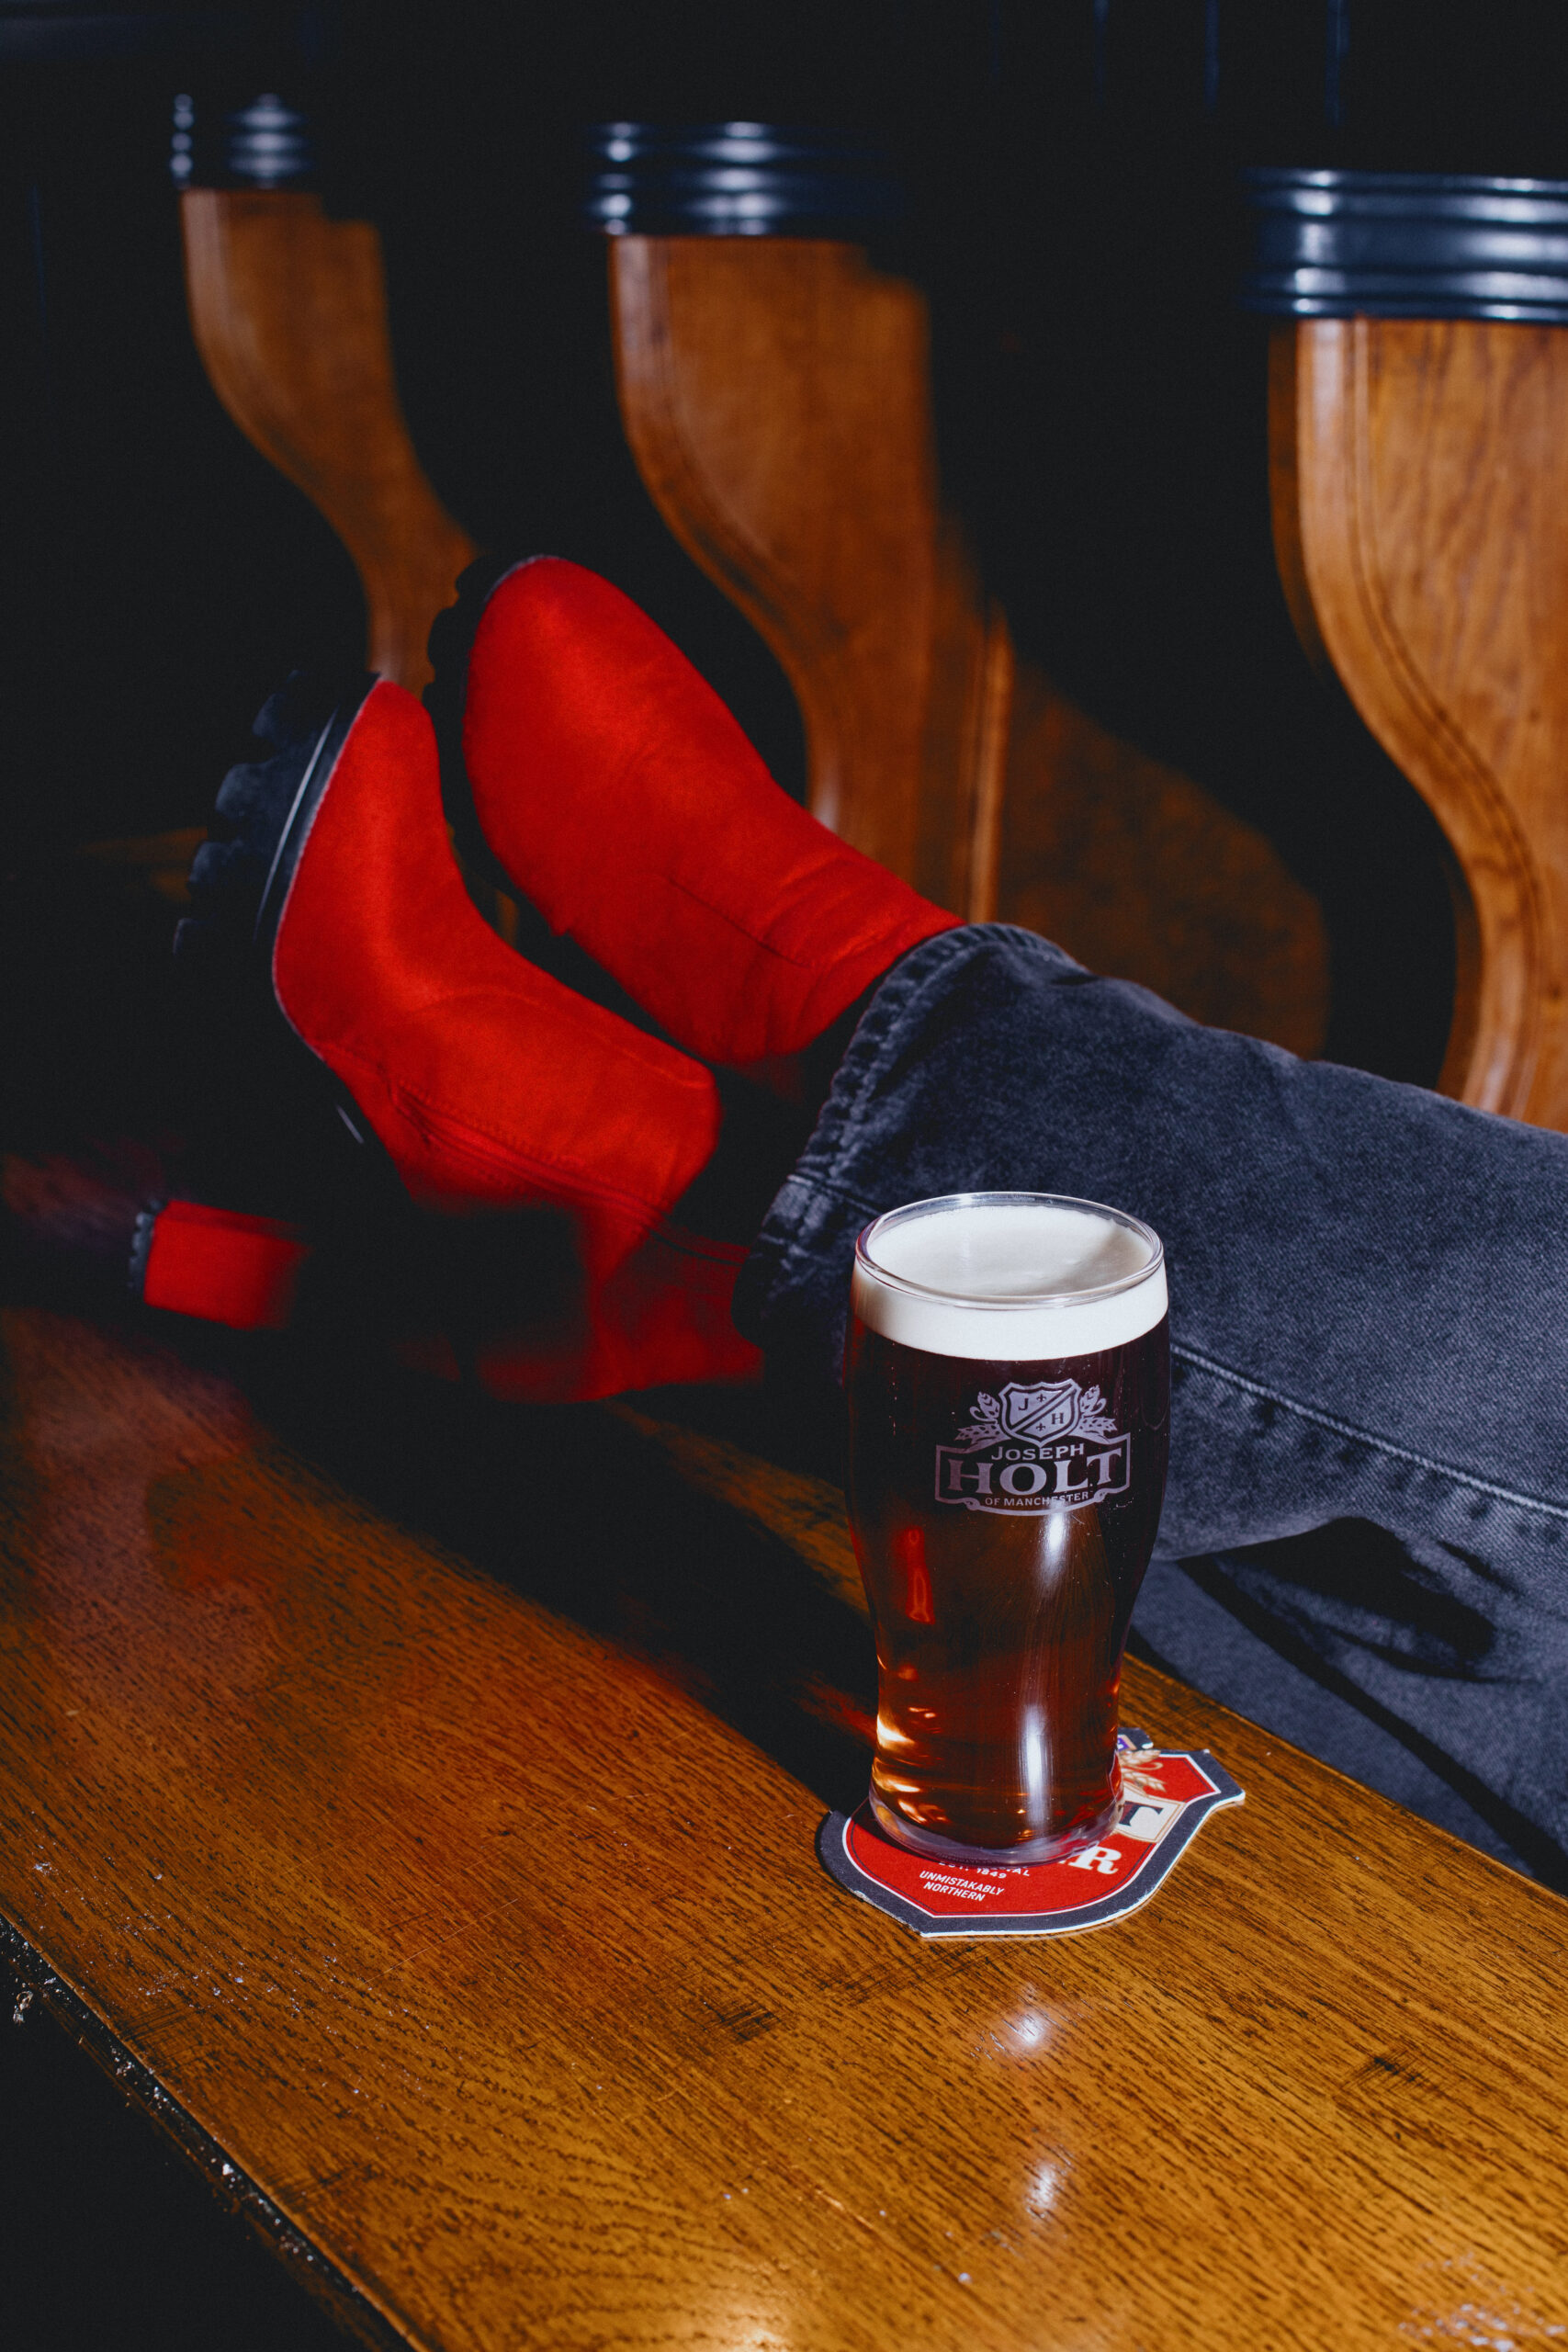 A pint of Bitter on a table with red boots.